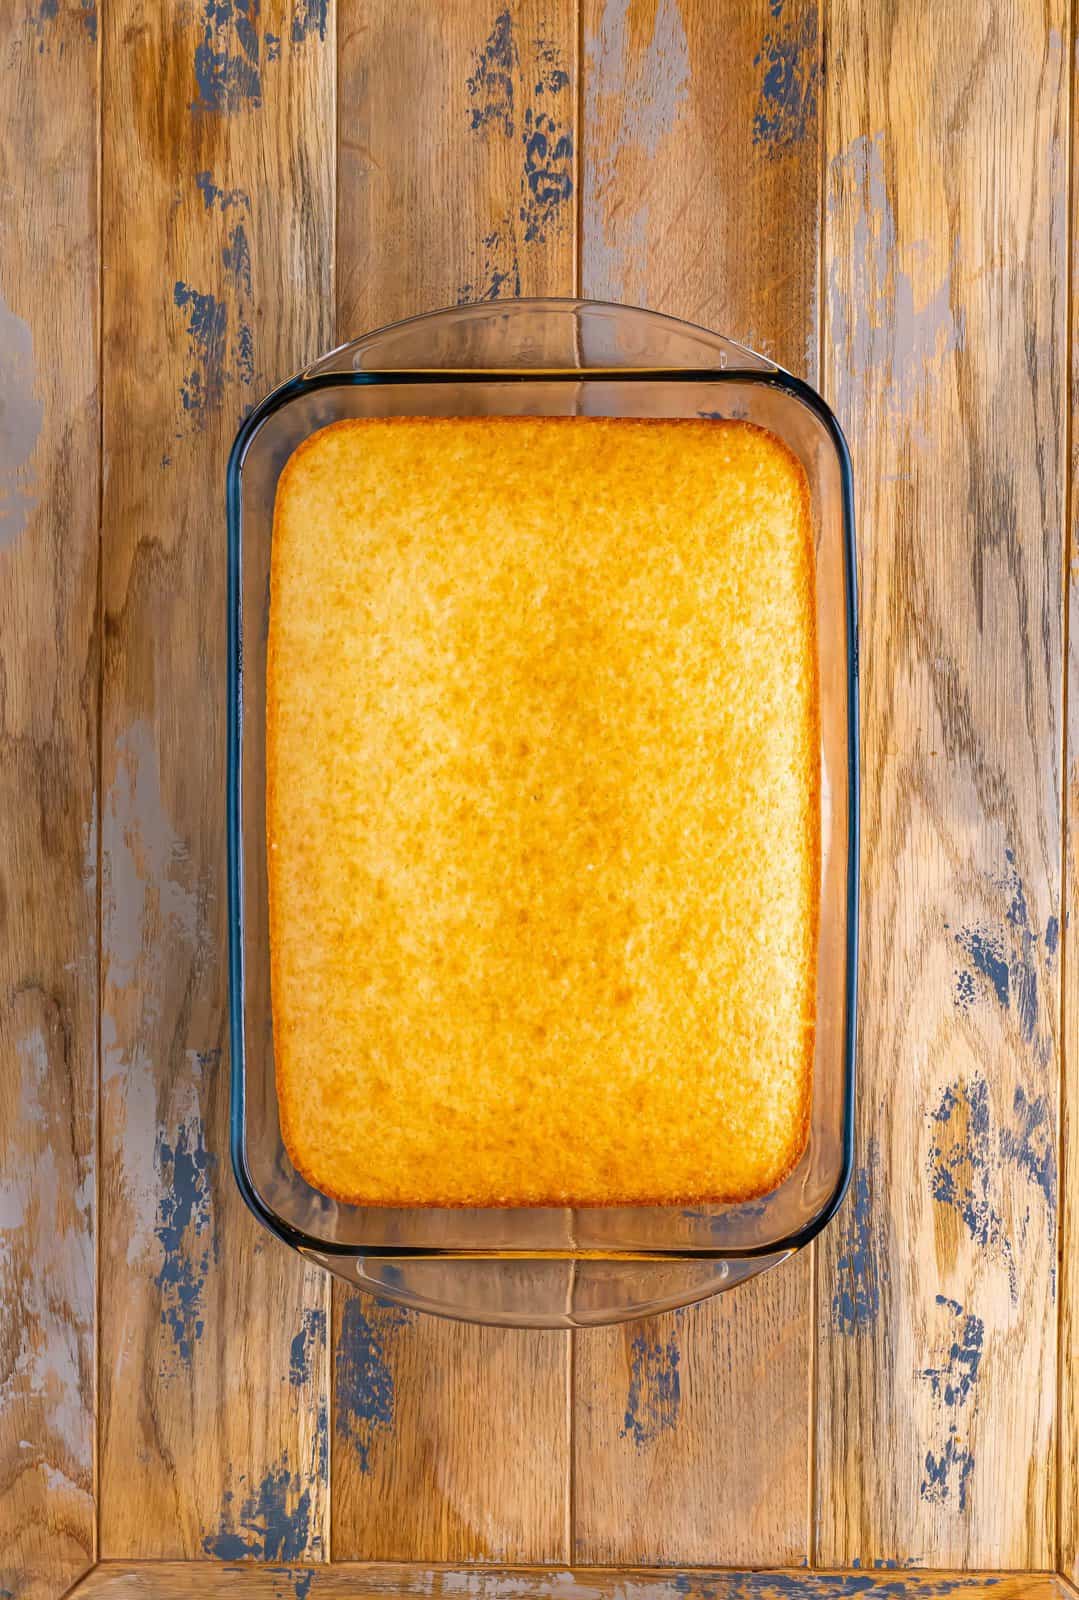 A baked cake in a baking dish.